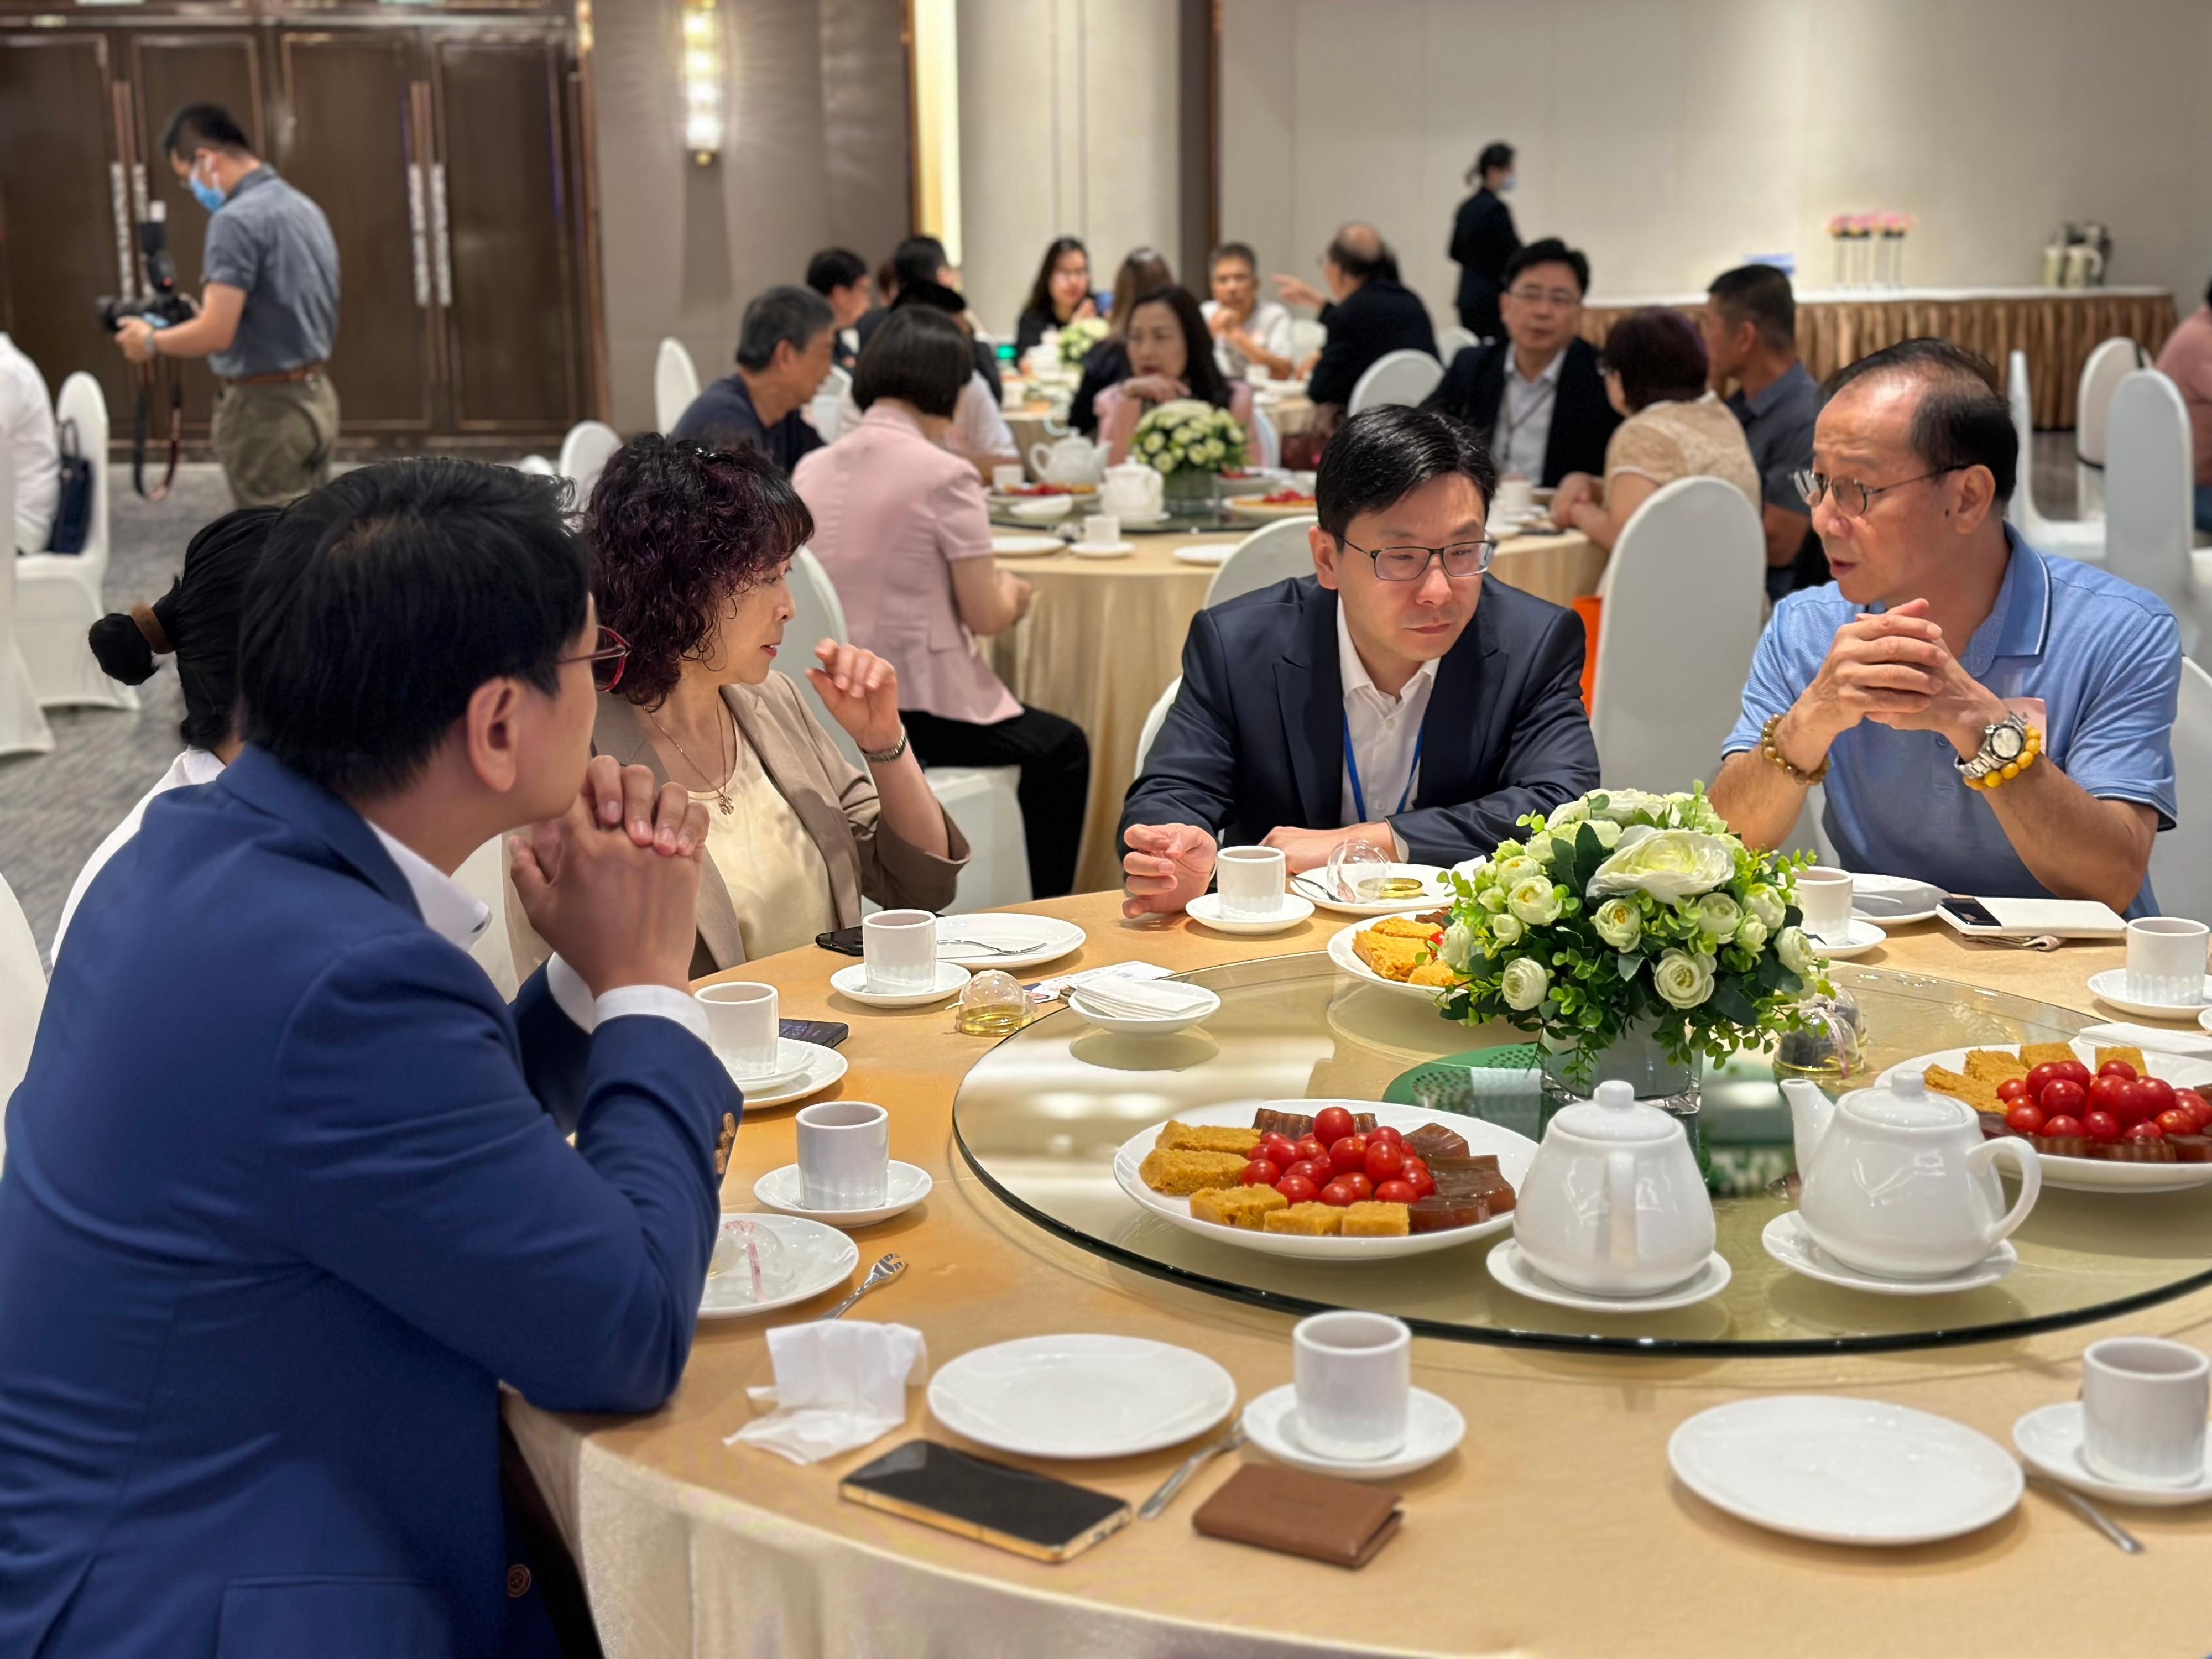 The Secretary for Labour and Welfare, Mr Chris Sun, leading a delegation of the Labour and Welfare Bureau, today (August 30) started his visit to three Mainland cities in the Guangdong-Hong Kong-Macao Greater Bay Area, together with a delegation of the Legislative Council Panel on Welfare Services. Photo shows Mr Sun (second right), accompanied by the Vice Chairman of Clifford Group, Ms Wendy Man (third right), in Guangzhou this morning, listening to a retired Hong Kong resident in Clifford Estates sharing his retirement life and needs on the Mainland.